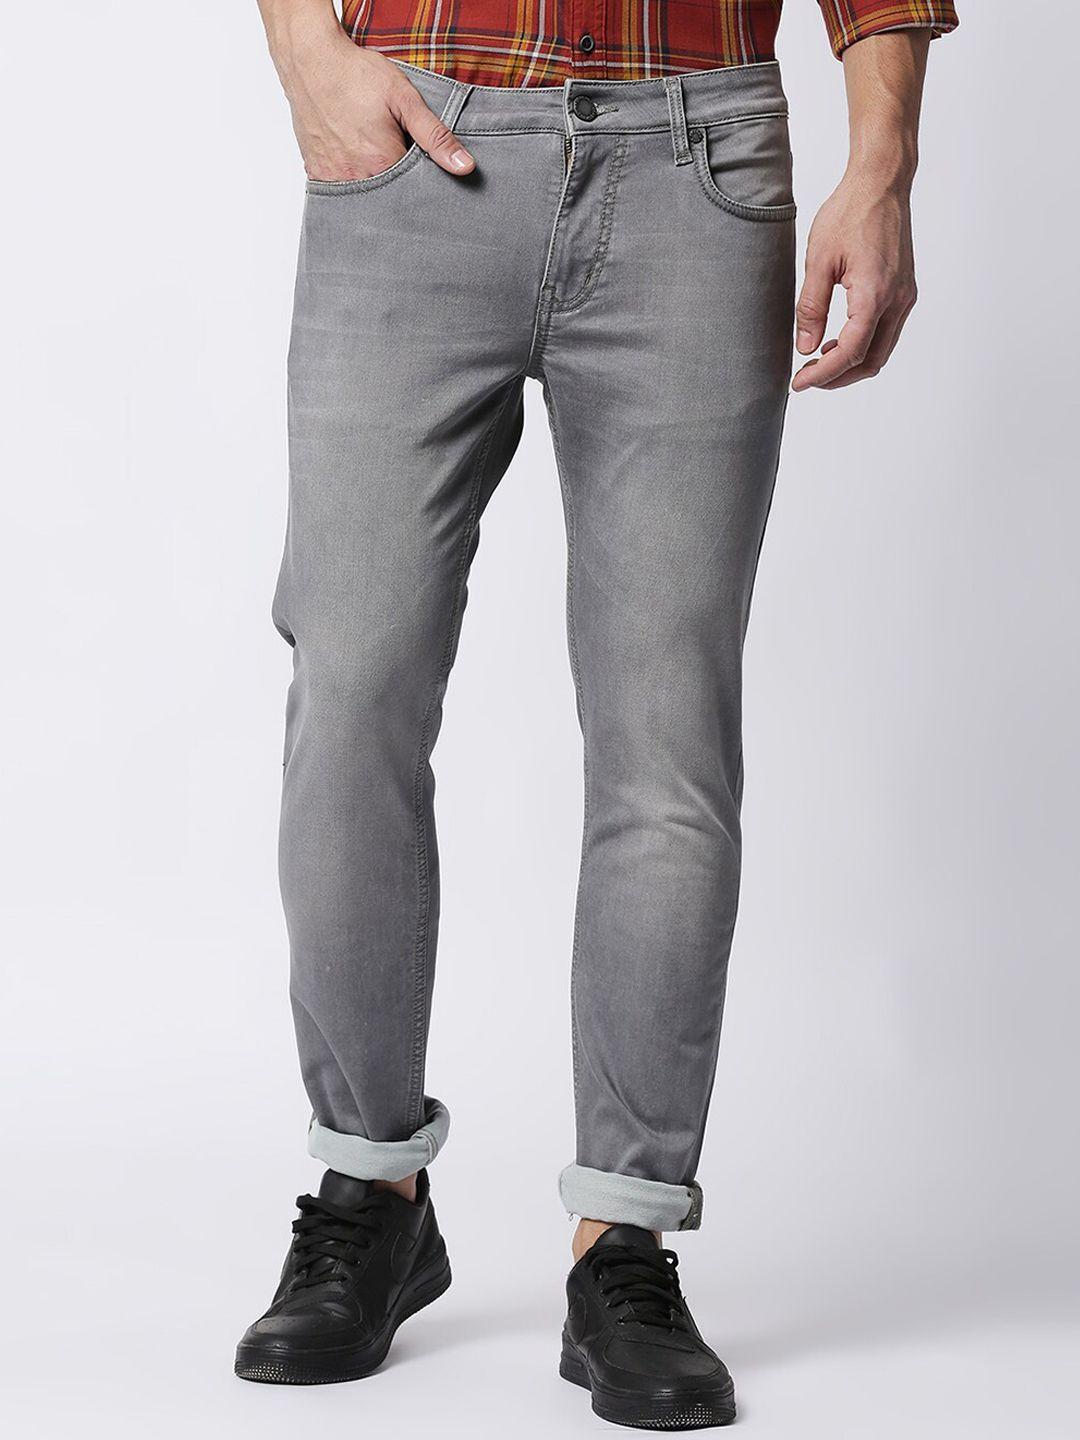 dragon-hill-men-grey-straight-fit-low-rise-light-fade-jeans